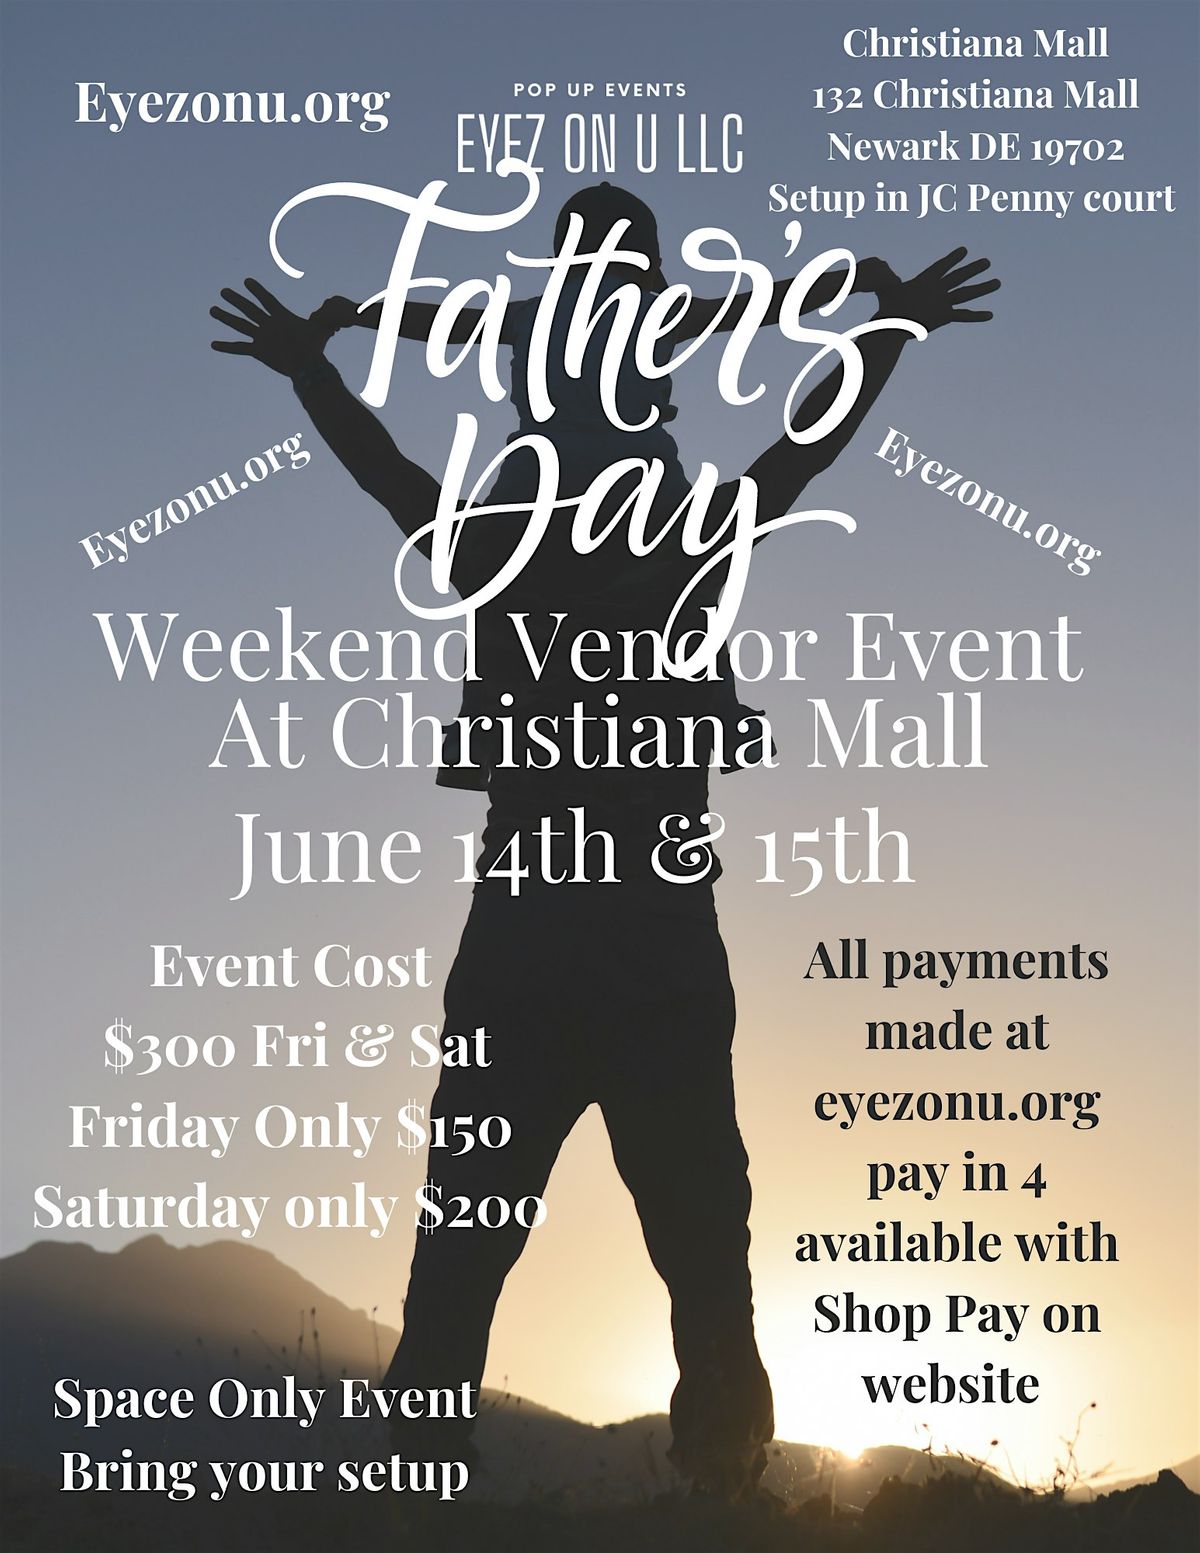 Two day vendor event at Christiana Mall June 14th -15th